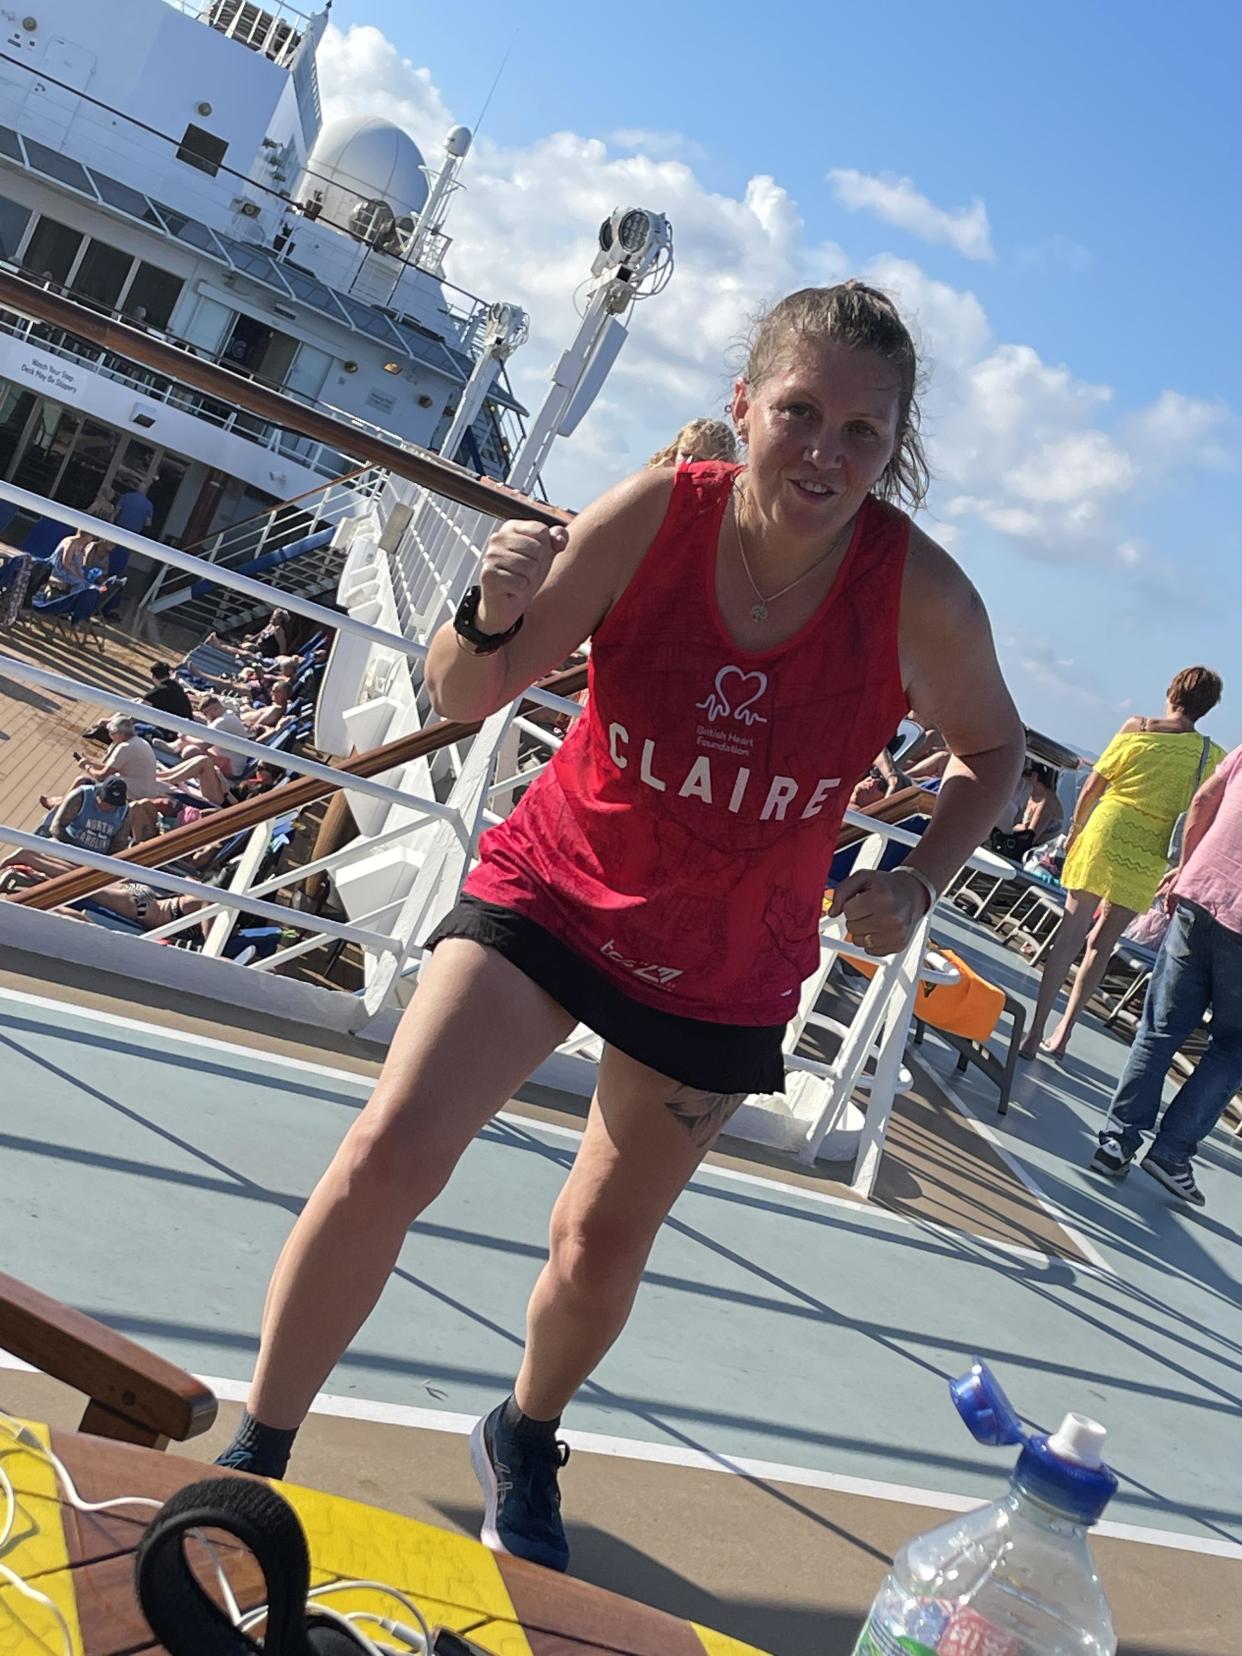 Claire Wilding continued to train during a holiday to Greece where 33 laps around the ship’s deck added up to three mile run (Claire Wilding/BHF/PA)